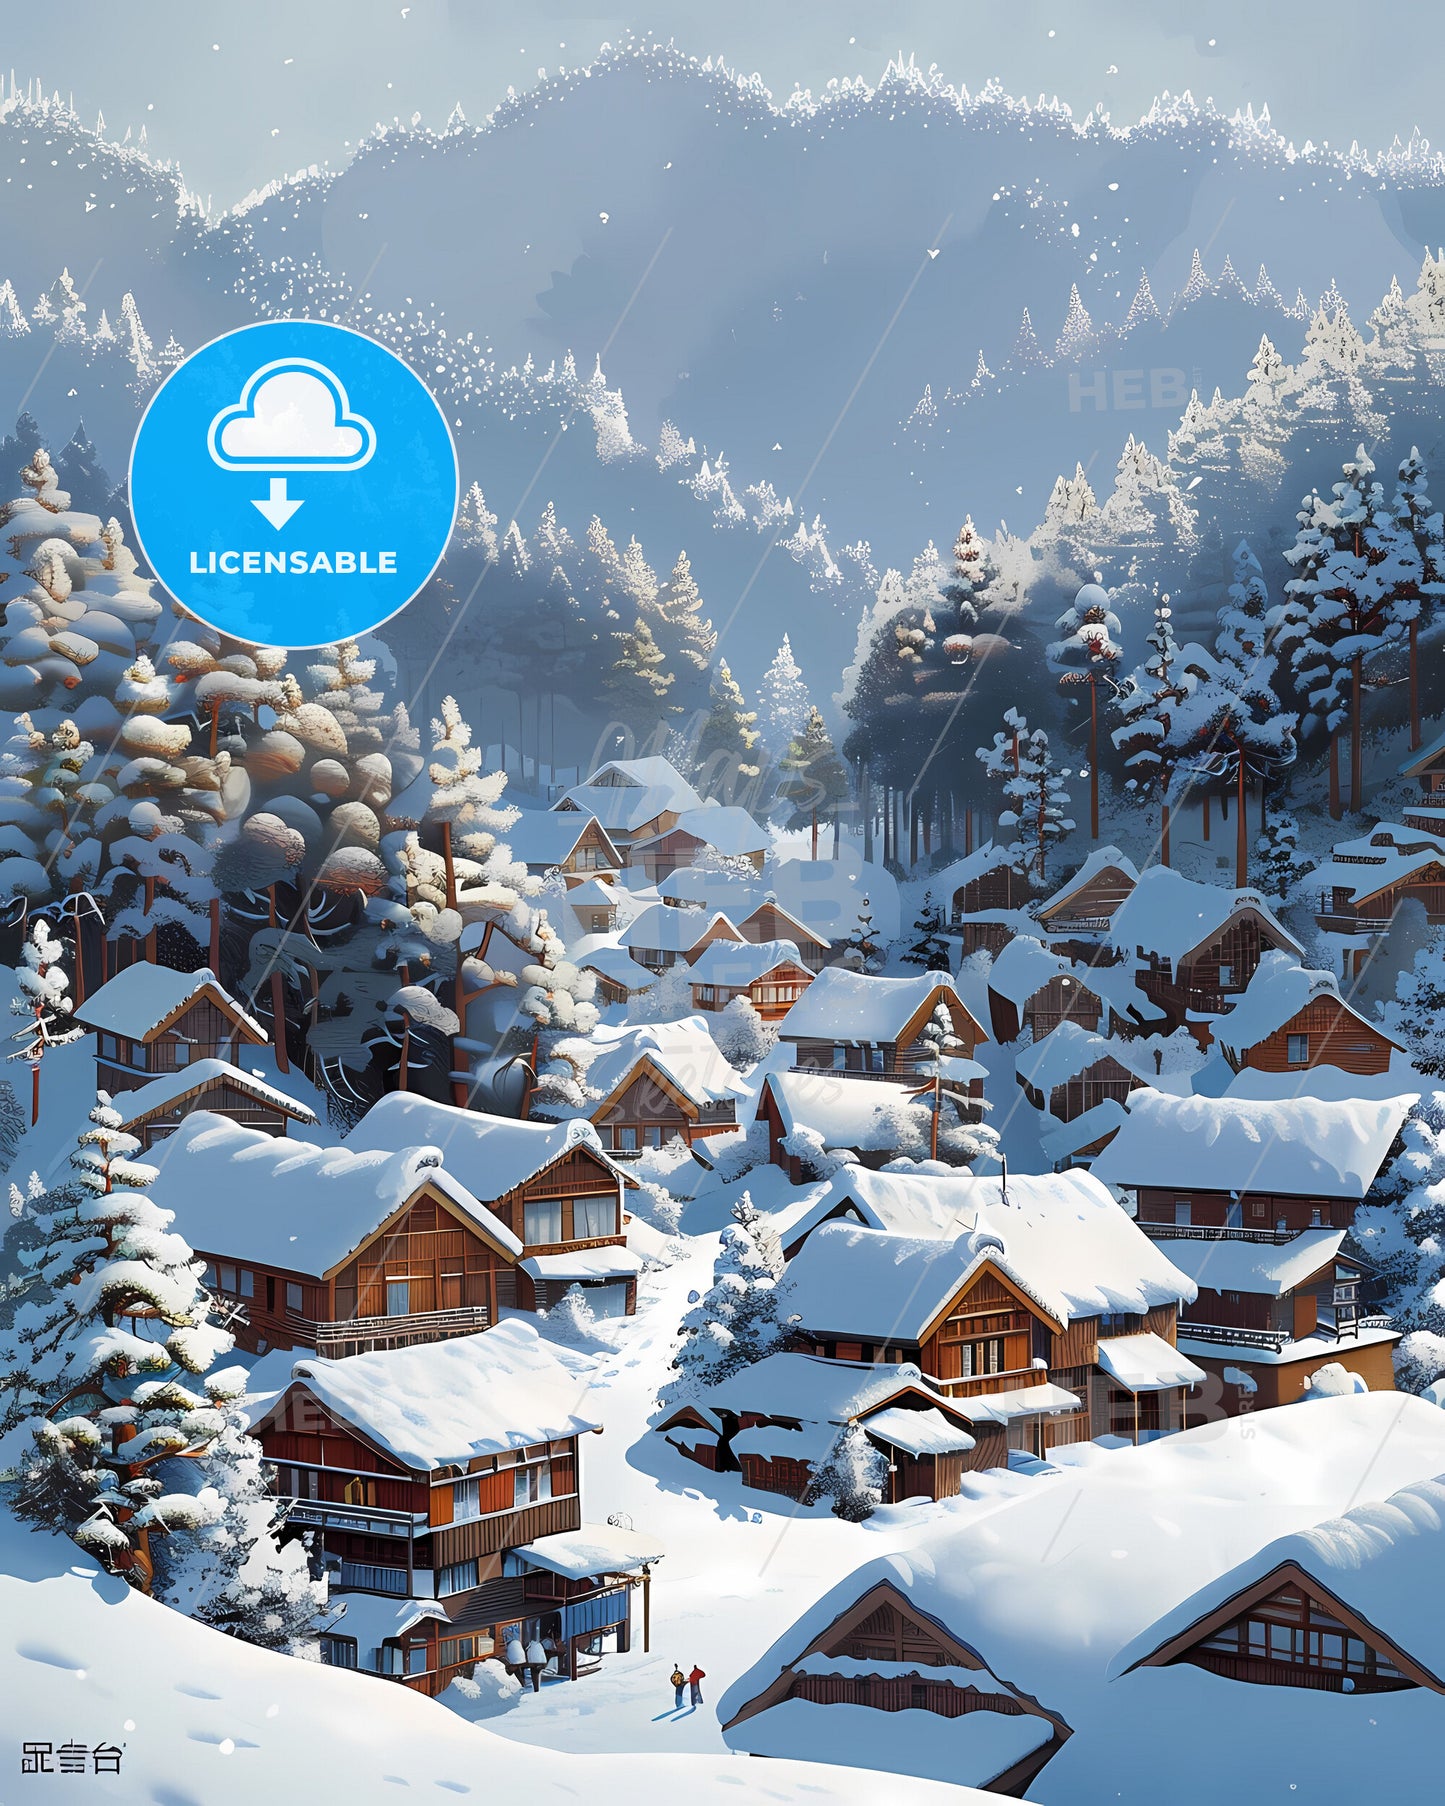 Tranquil Winter Village: A Snowy Landscape Painting with Hyperrealistic Details and Vibrant Pastel Colors